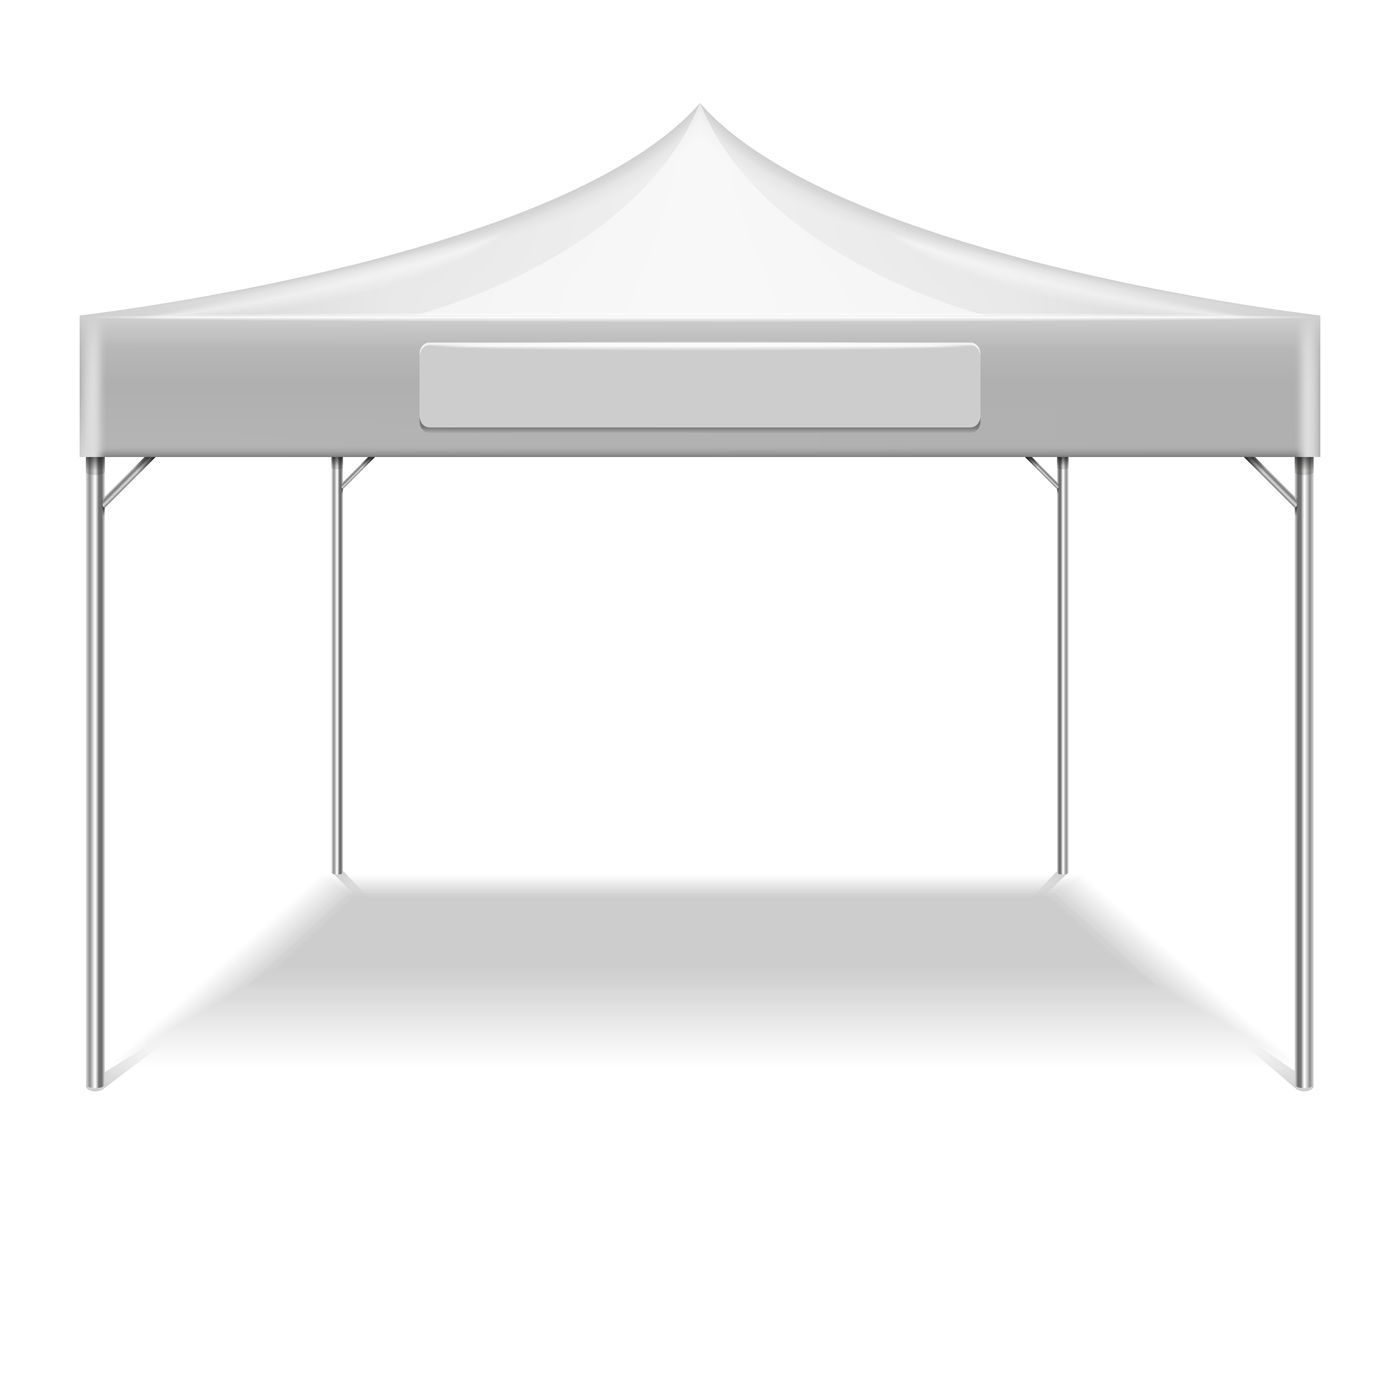 Download Realistic white outdoor folding party tent vector mockup ...